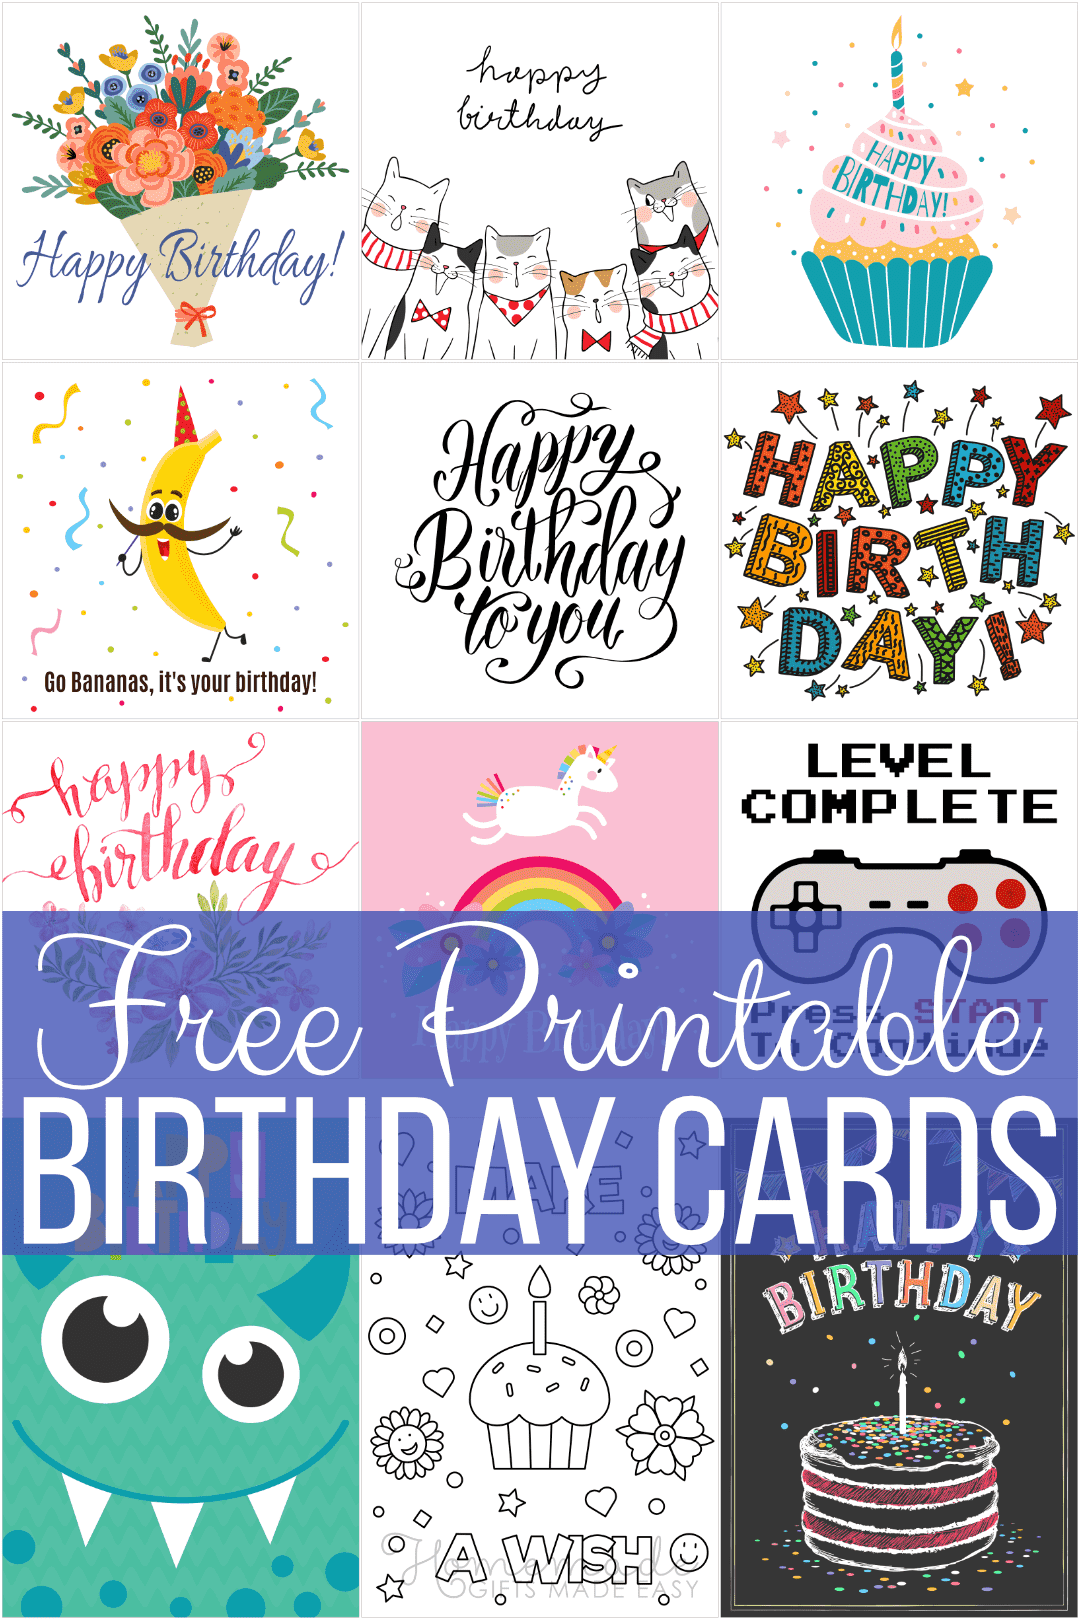 Free Printable Birthday Cards For Everyone - Free Printable Birthday Cards For Her